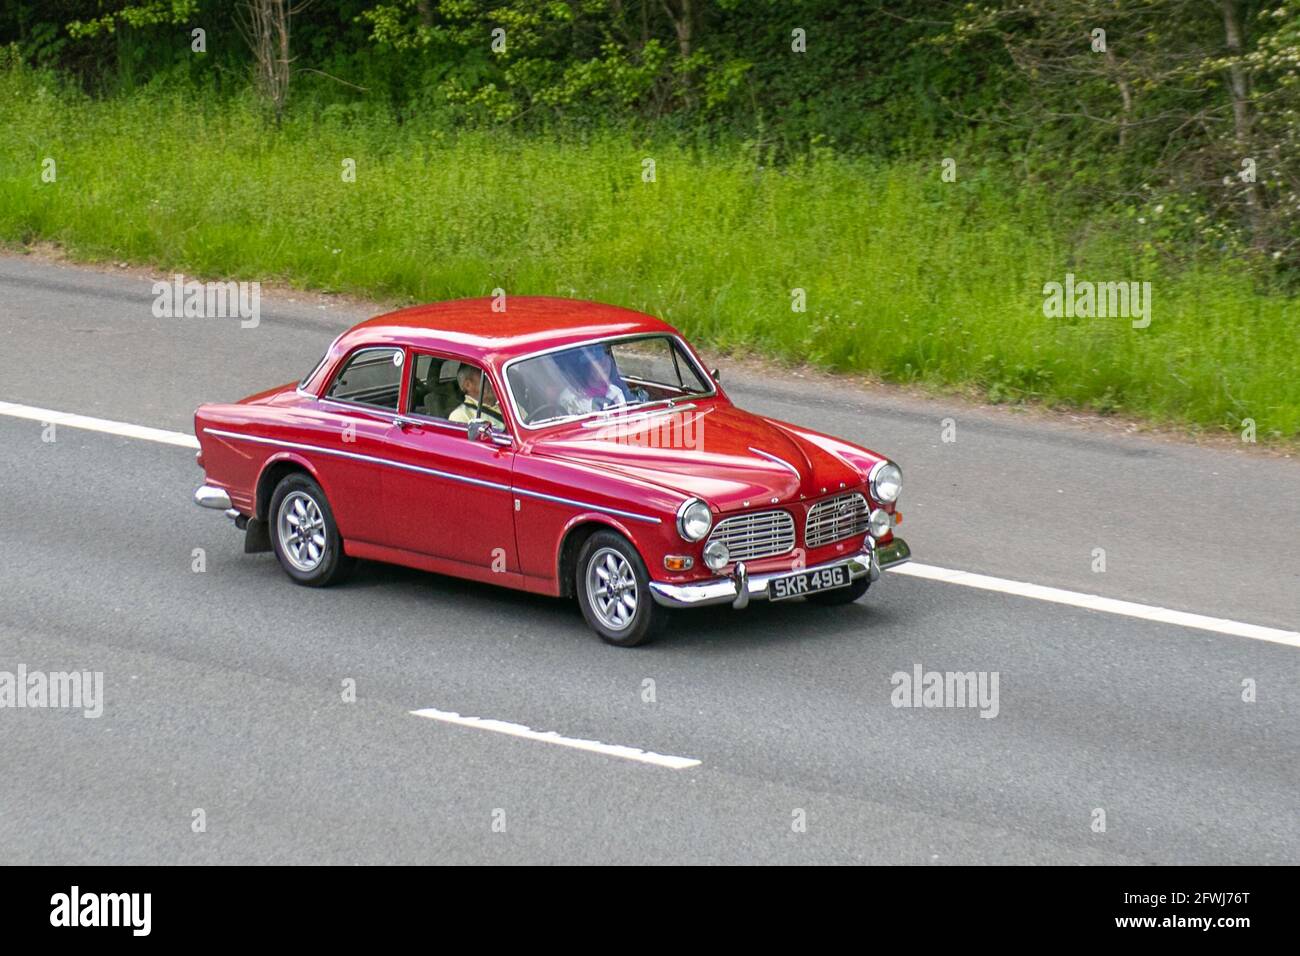 1968 60s red Swedish Volvo 123 Gt 1780cc retro 4dr saloon,  Vehicular traffic, moving vehicles, foreign cars, vehicle driving on UK roads, motors, motoring on the M6 motorway highway UK road network. Stock Photo